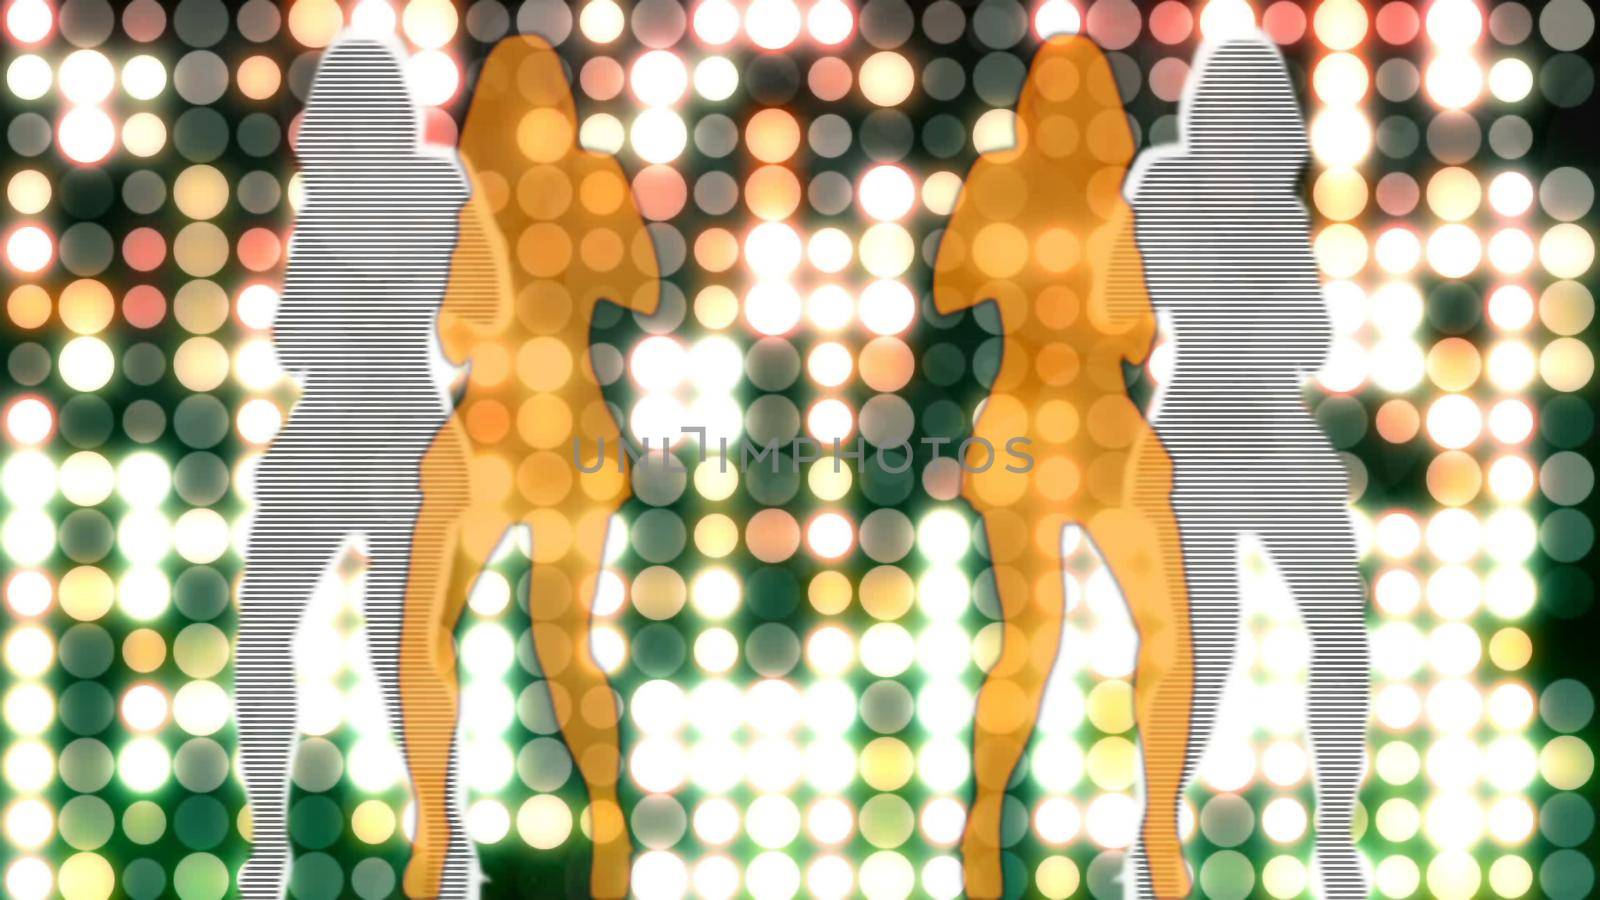 Abstract Background with nice dancing girls for club visuals,